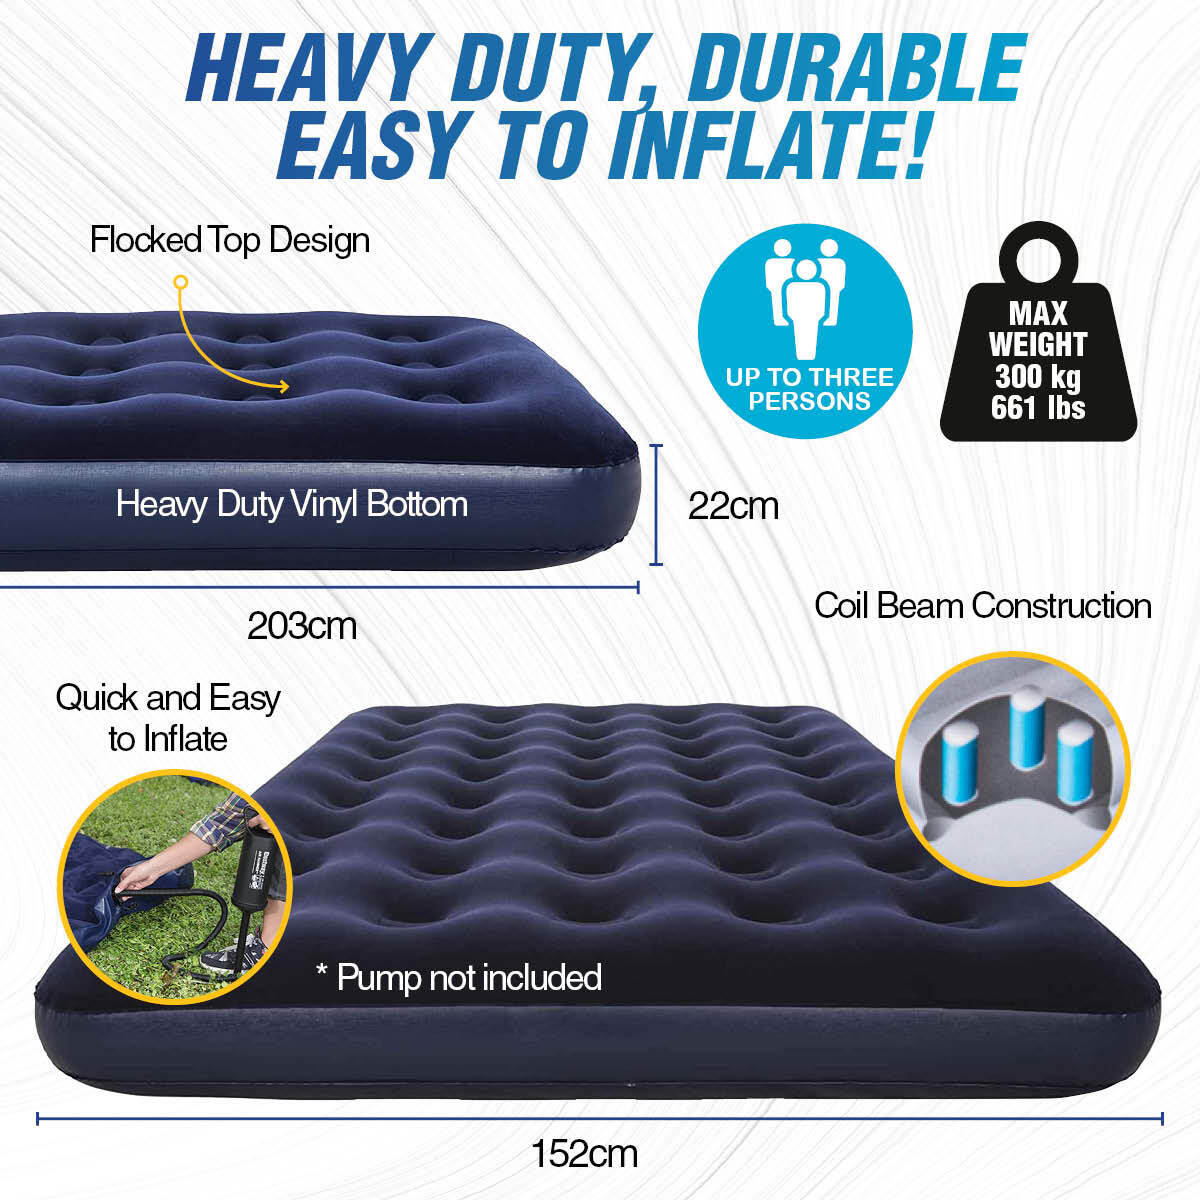 Queen Inflatable Air Bed Heavy Duty Durable Camping